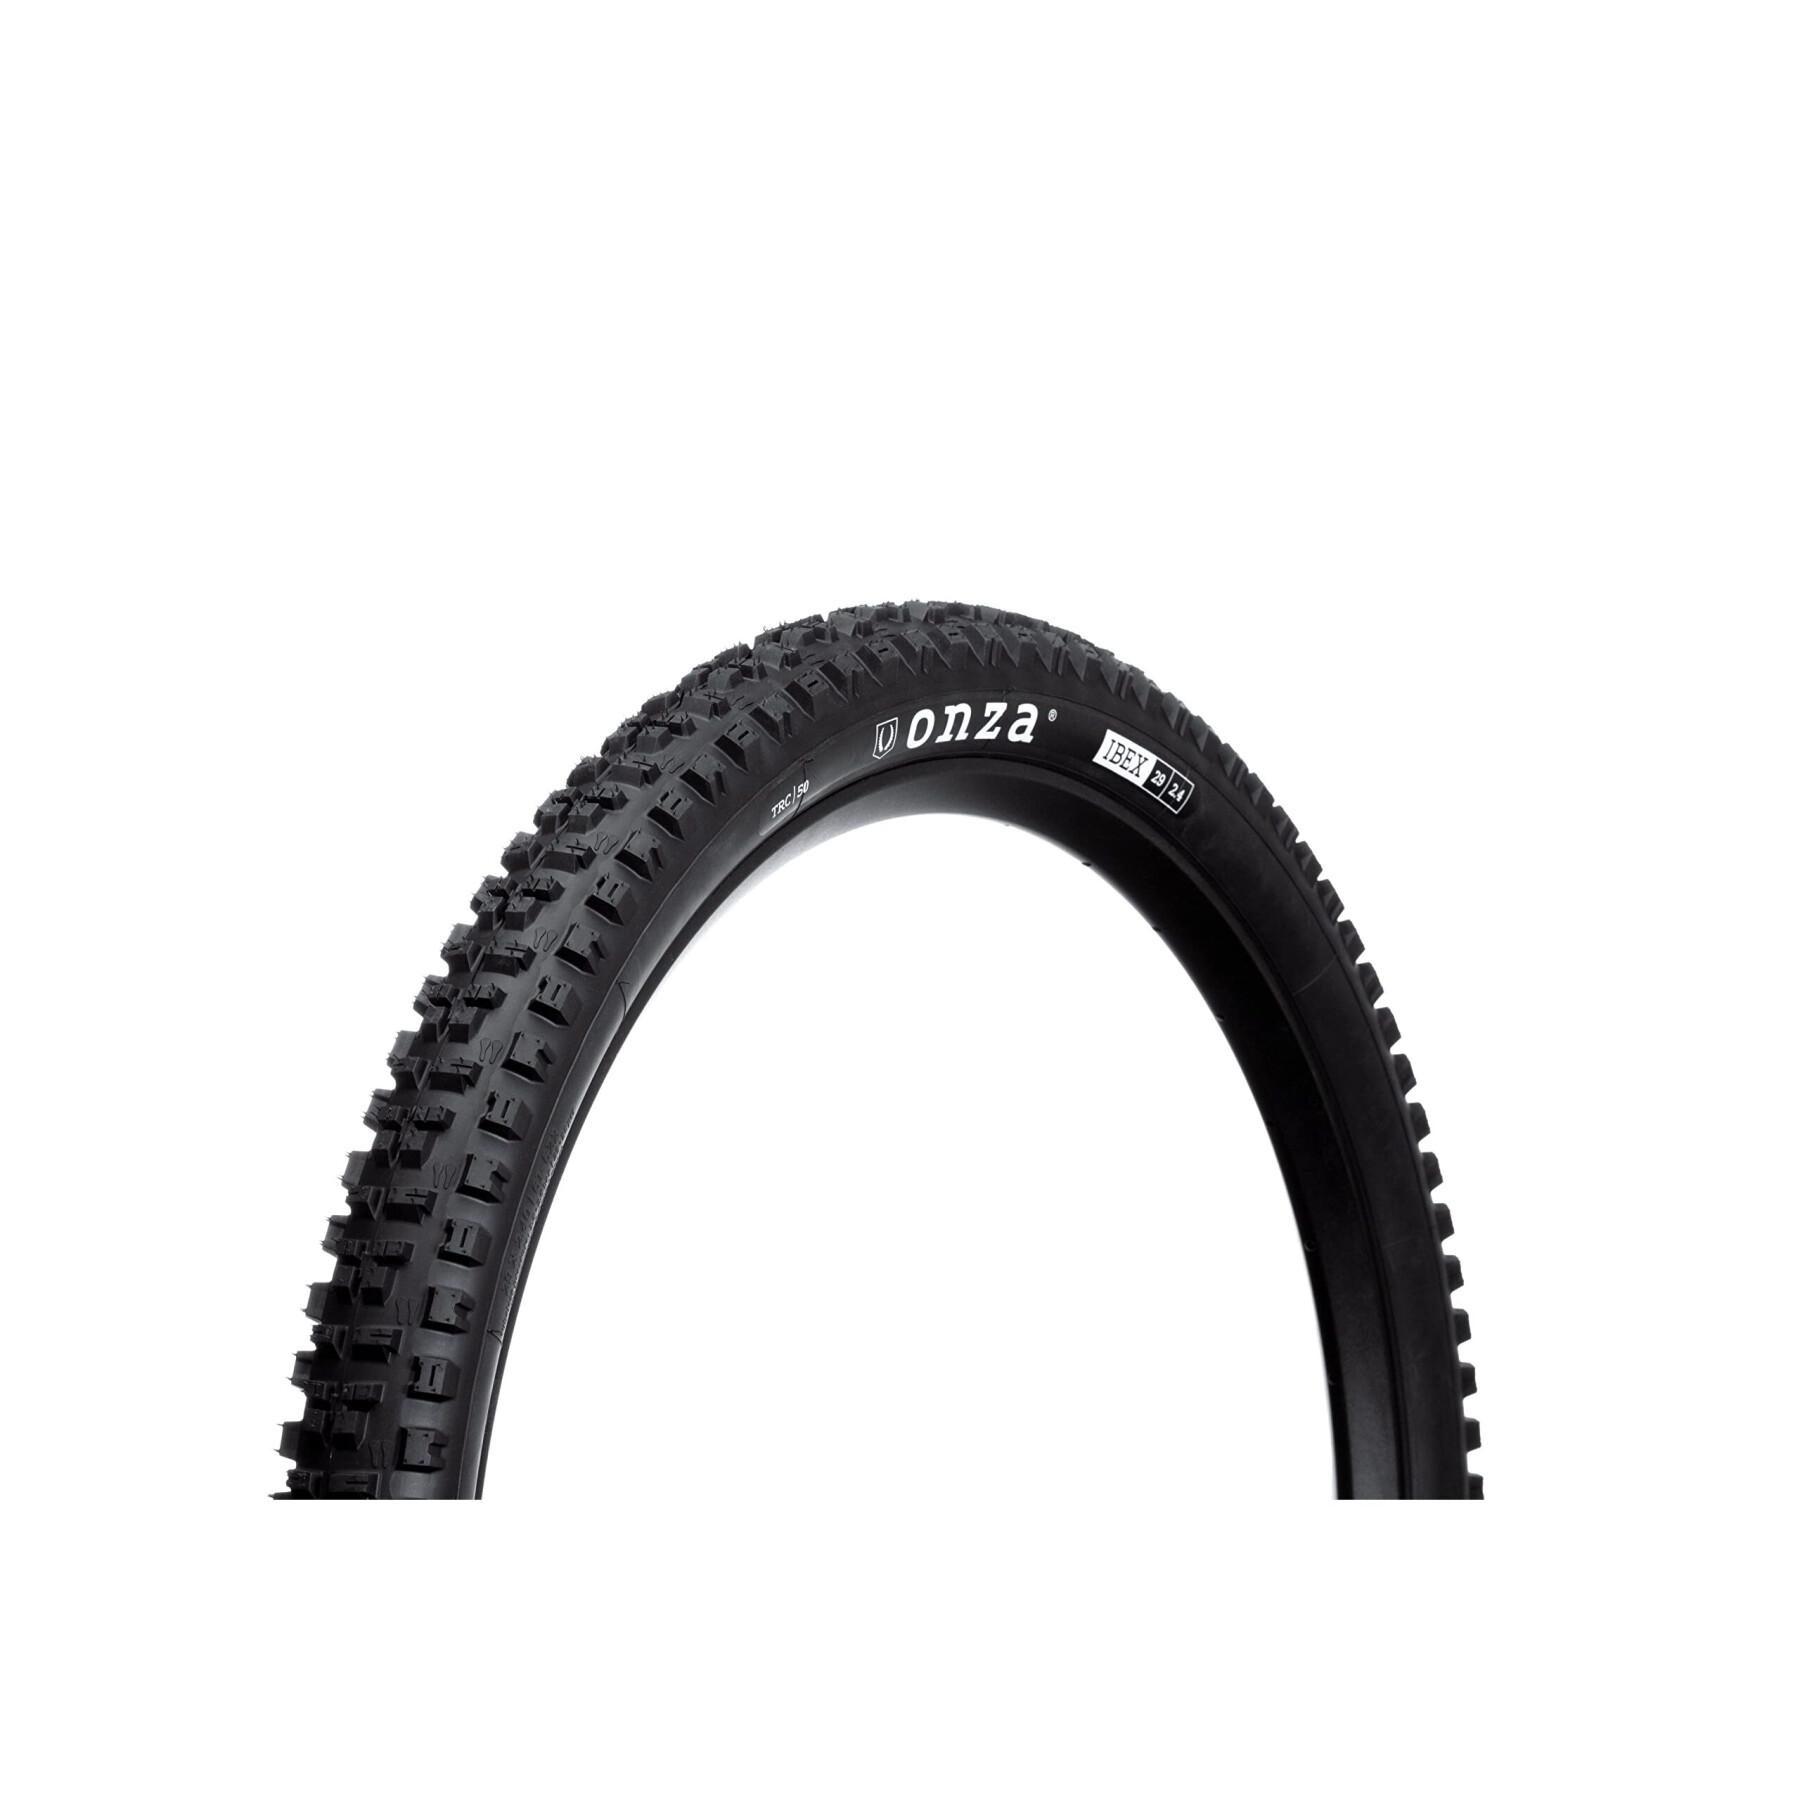 Opona Onza Ibex TRC 60 TPI gomme ,50a | 45a, 61-622, 880 g